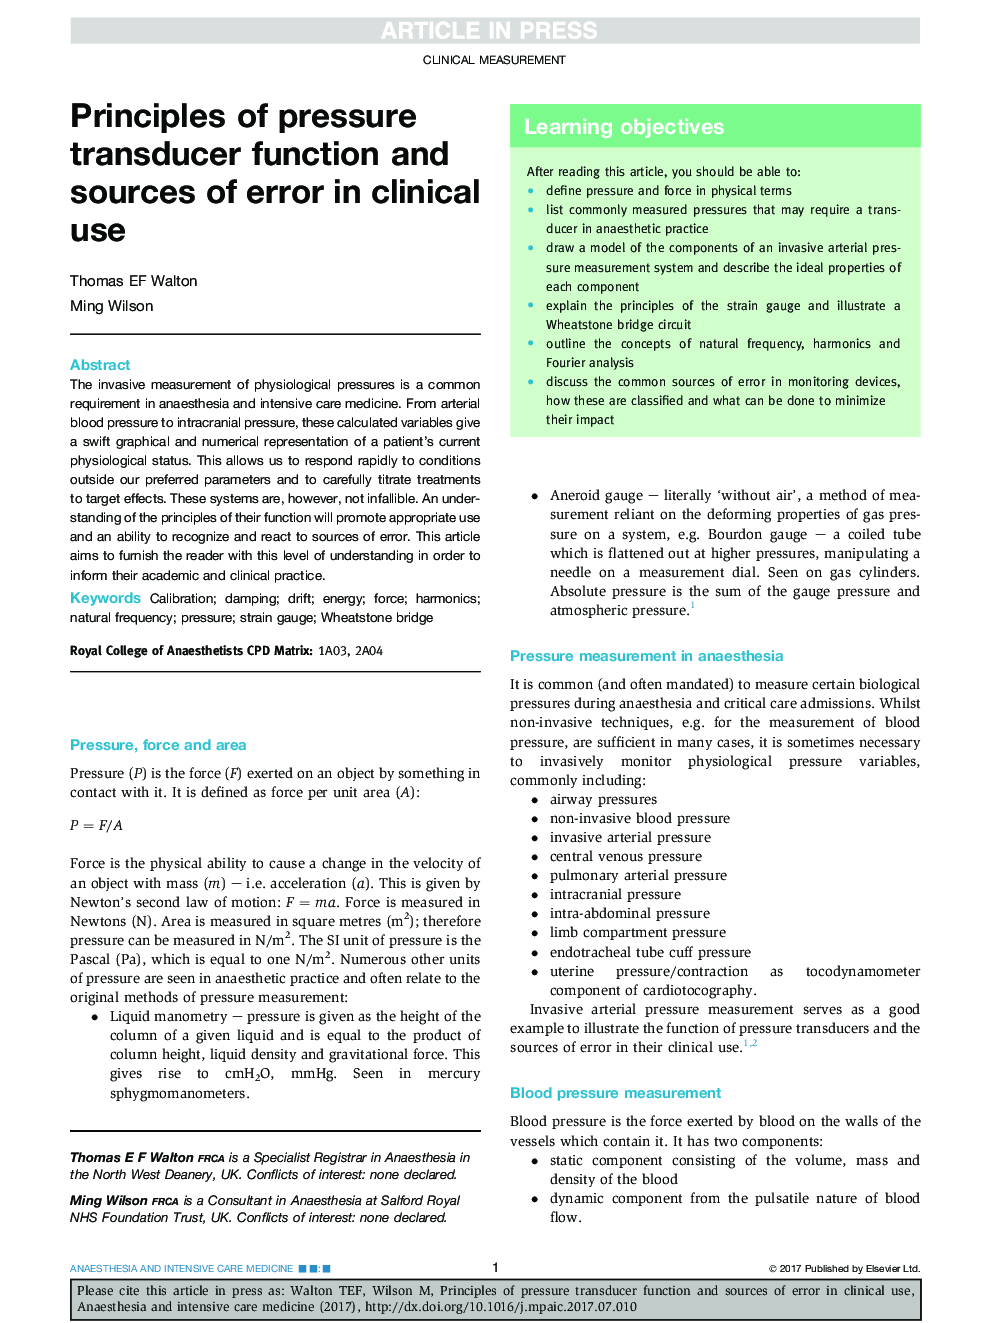 Principles of pressure transducer function and sources of error in clinical use